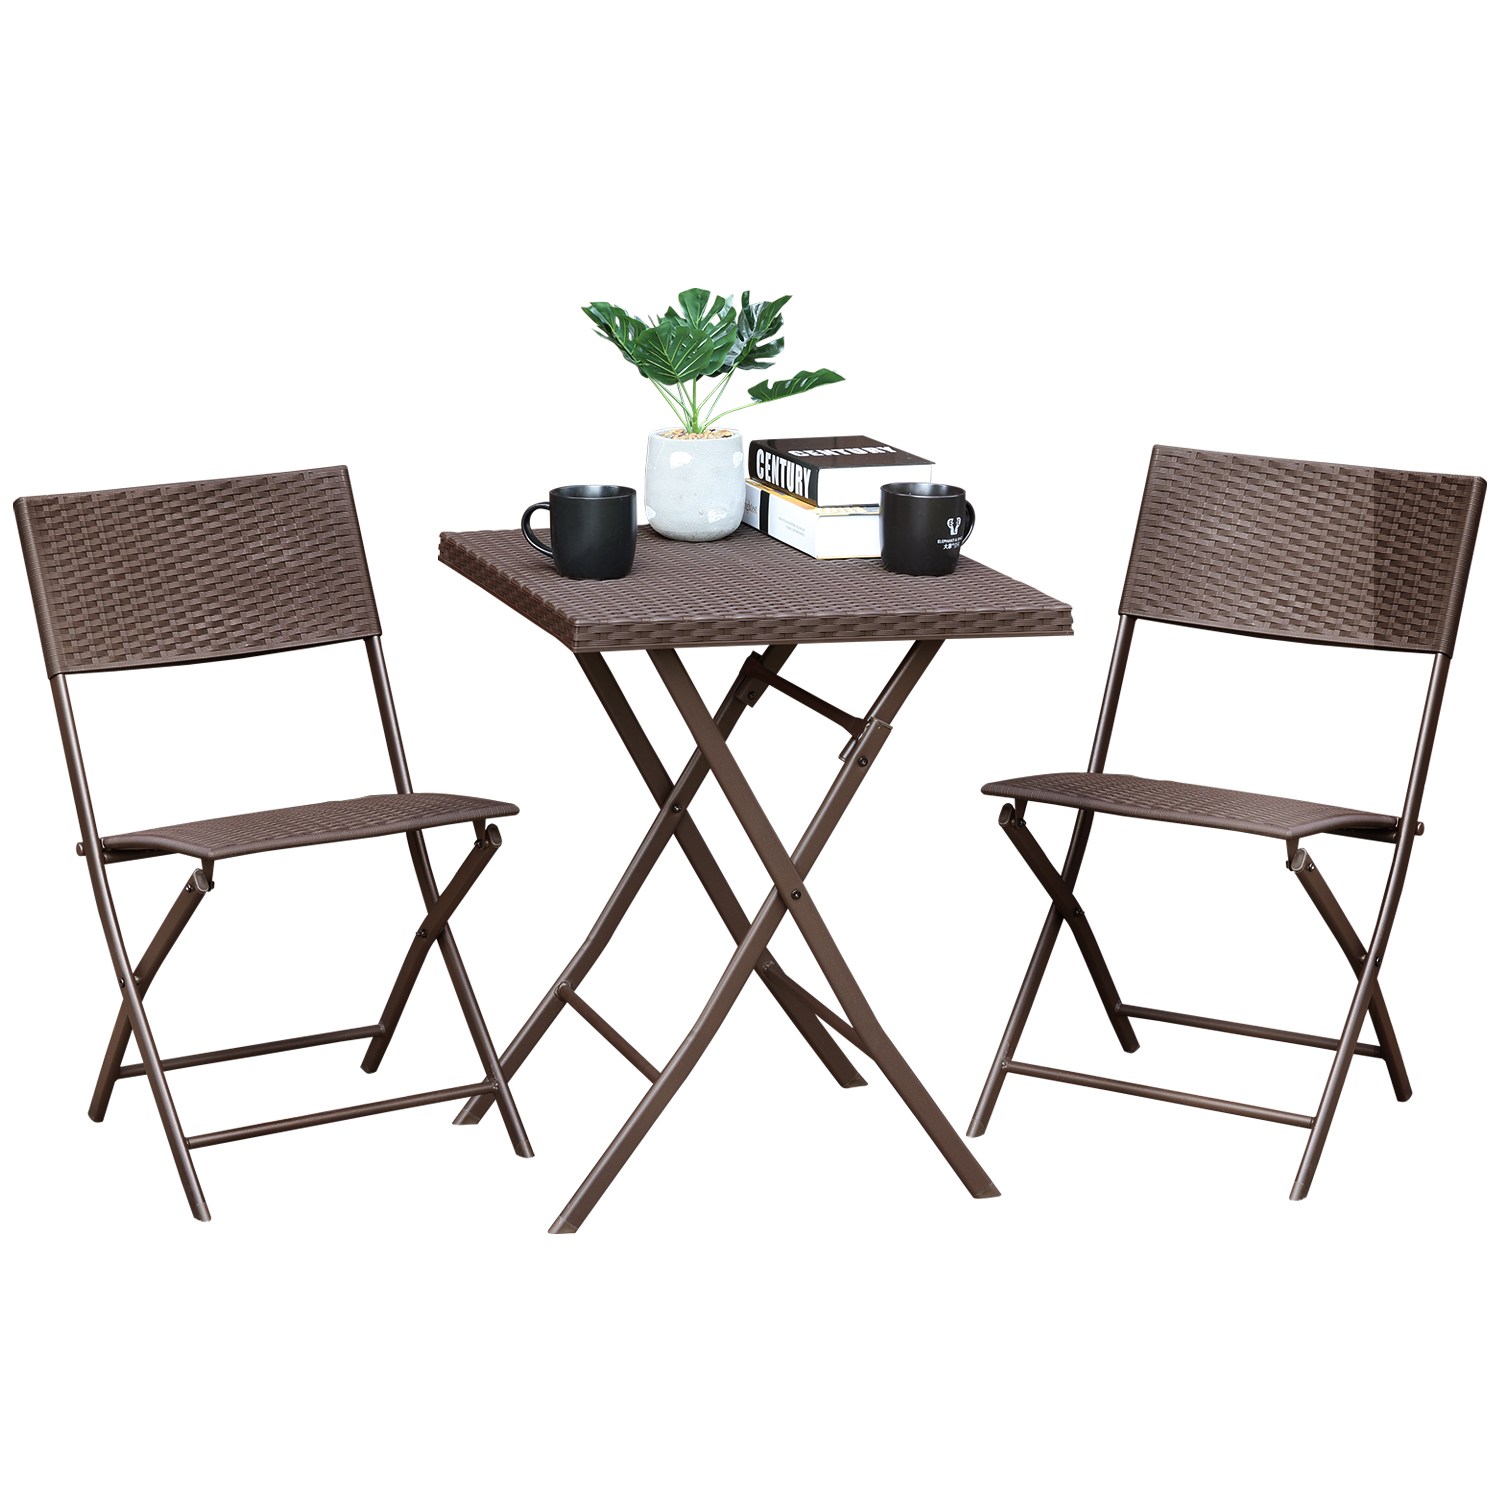 3 piece Wicker Bistro Set, Foldable One Table and Two Chairs for Garden, Yard, Porch, Poolside-Boyel Living